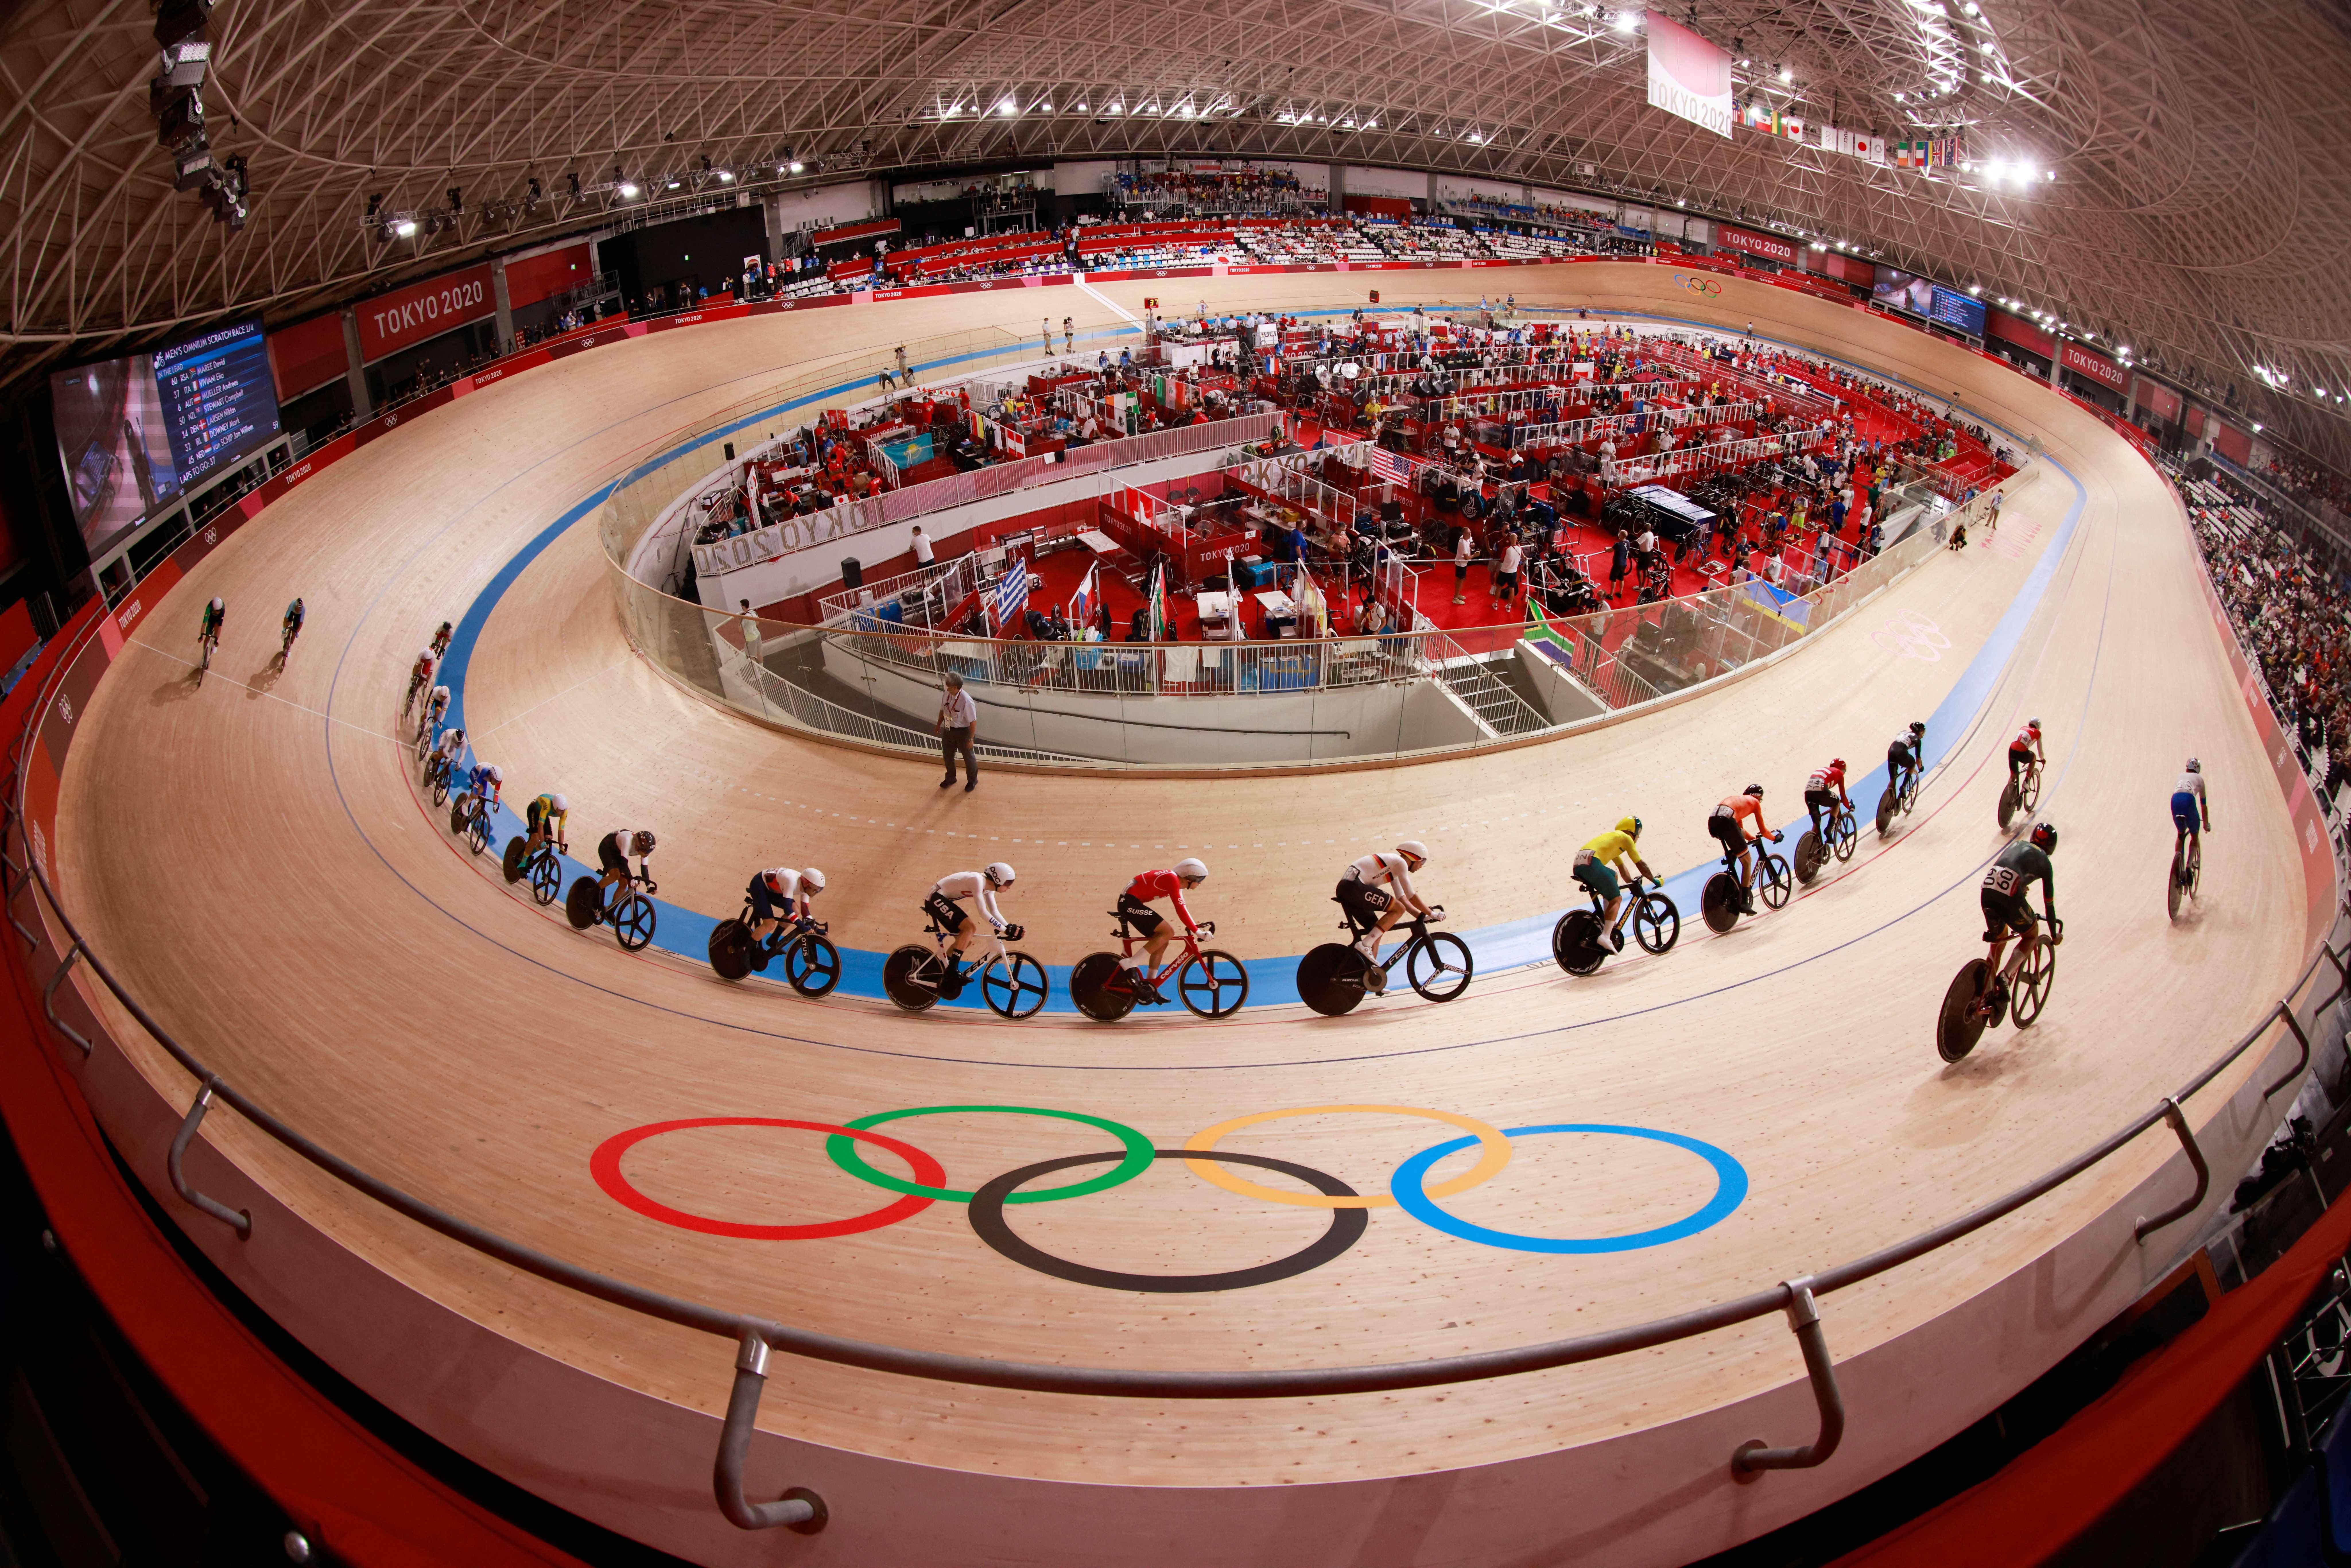 Cyclists compete in the men's track cycling omnium scratch race during the T Olympic Games at Izu Velodrome in Izu, Japan, on August 5